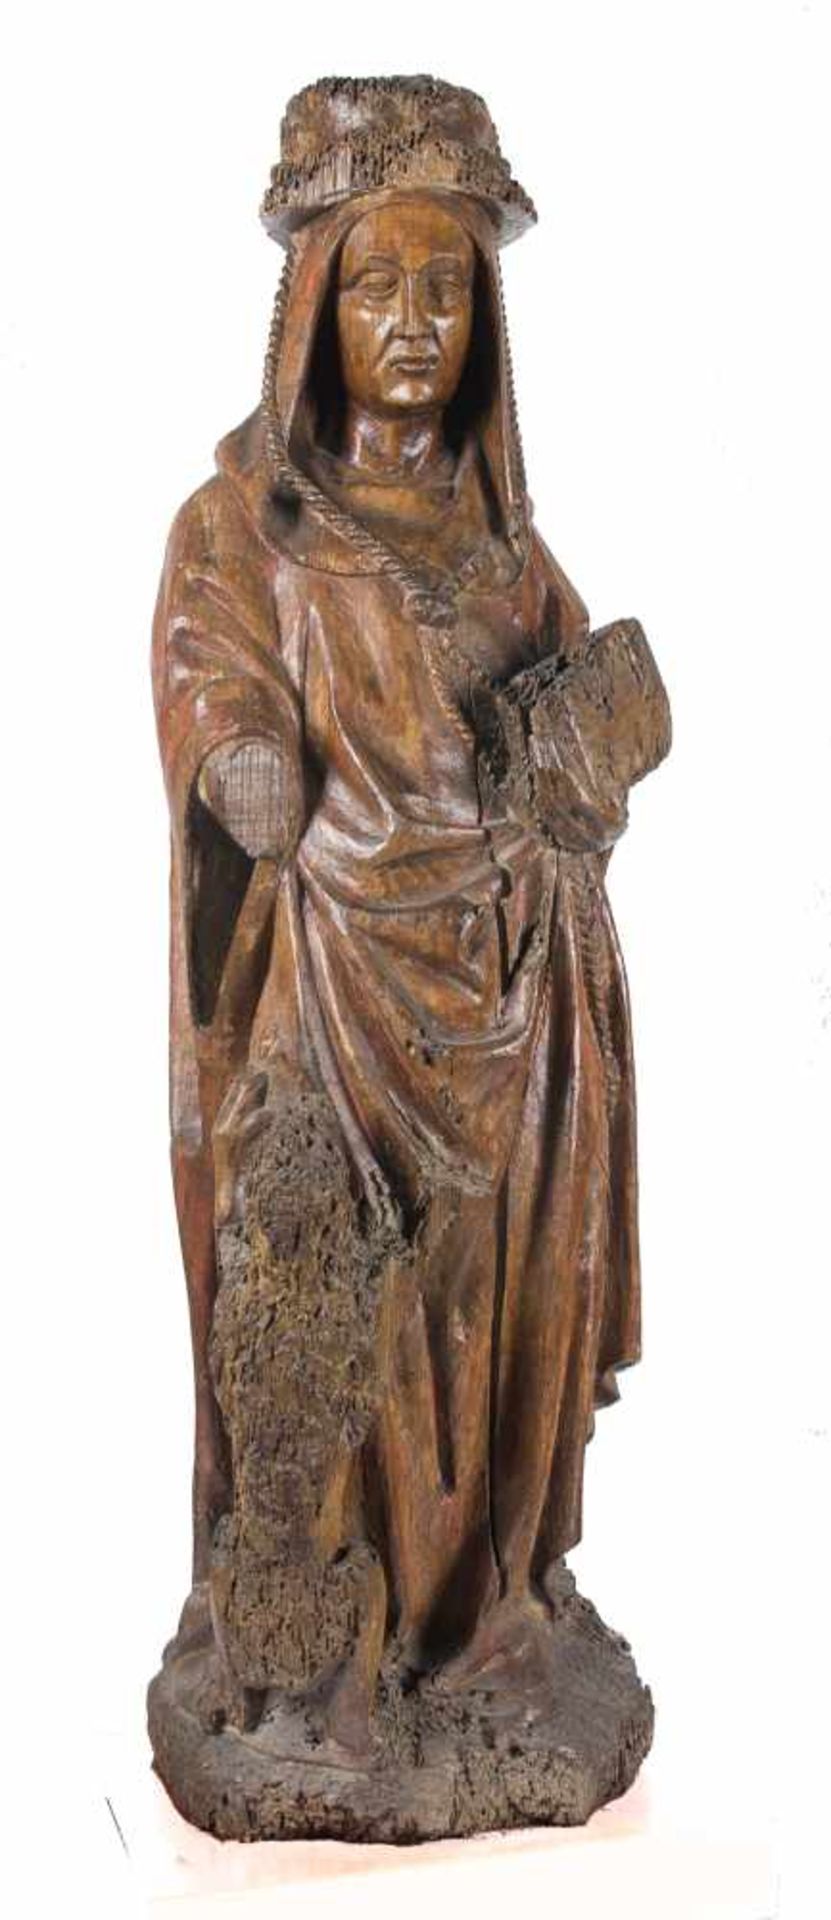 "Saint Jerome". Carved wooden sculpture with polychrome residue. Flemish School. Gothic. Late 15th